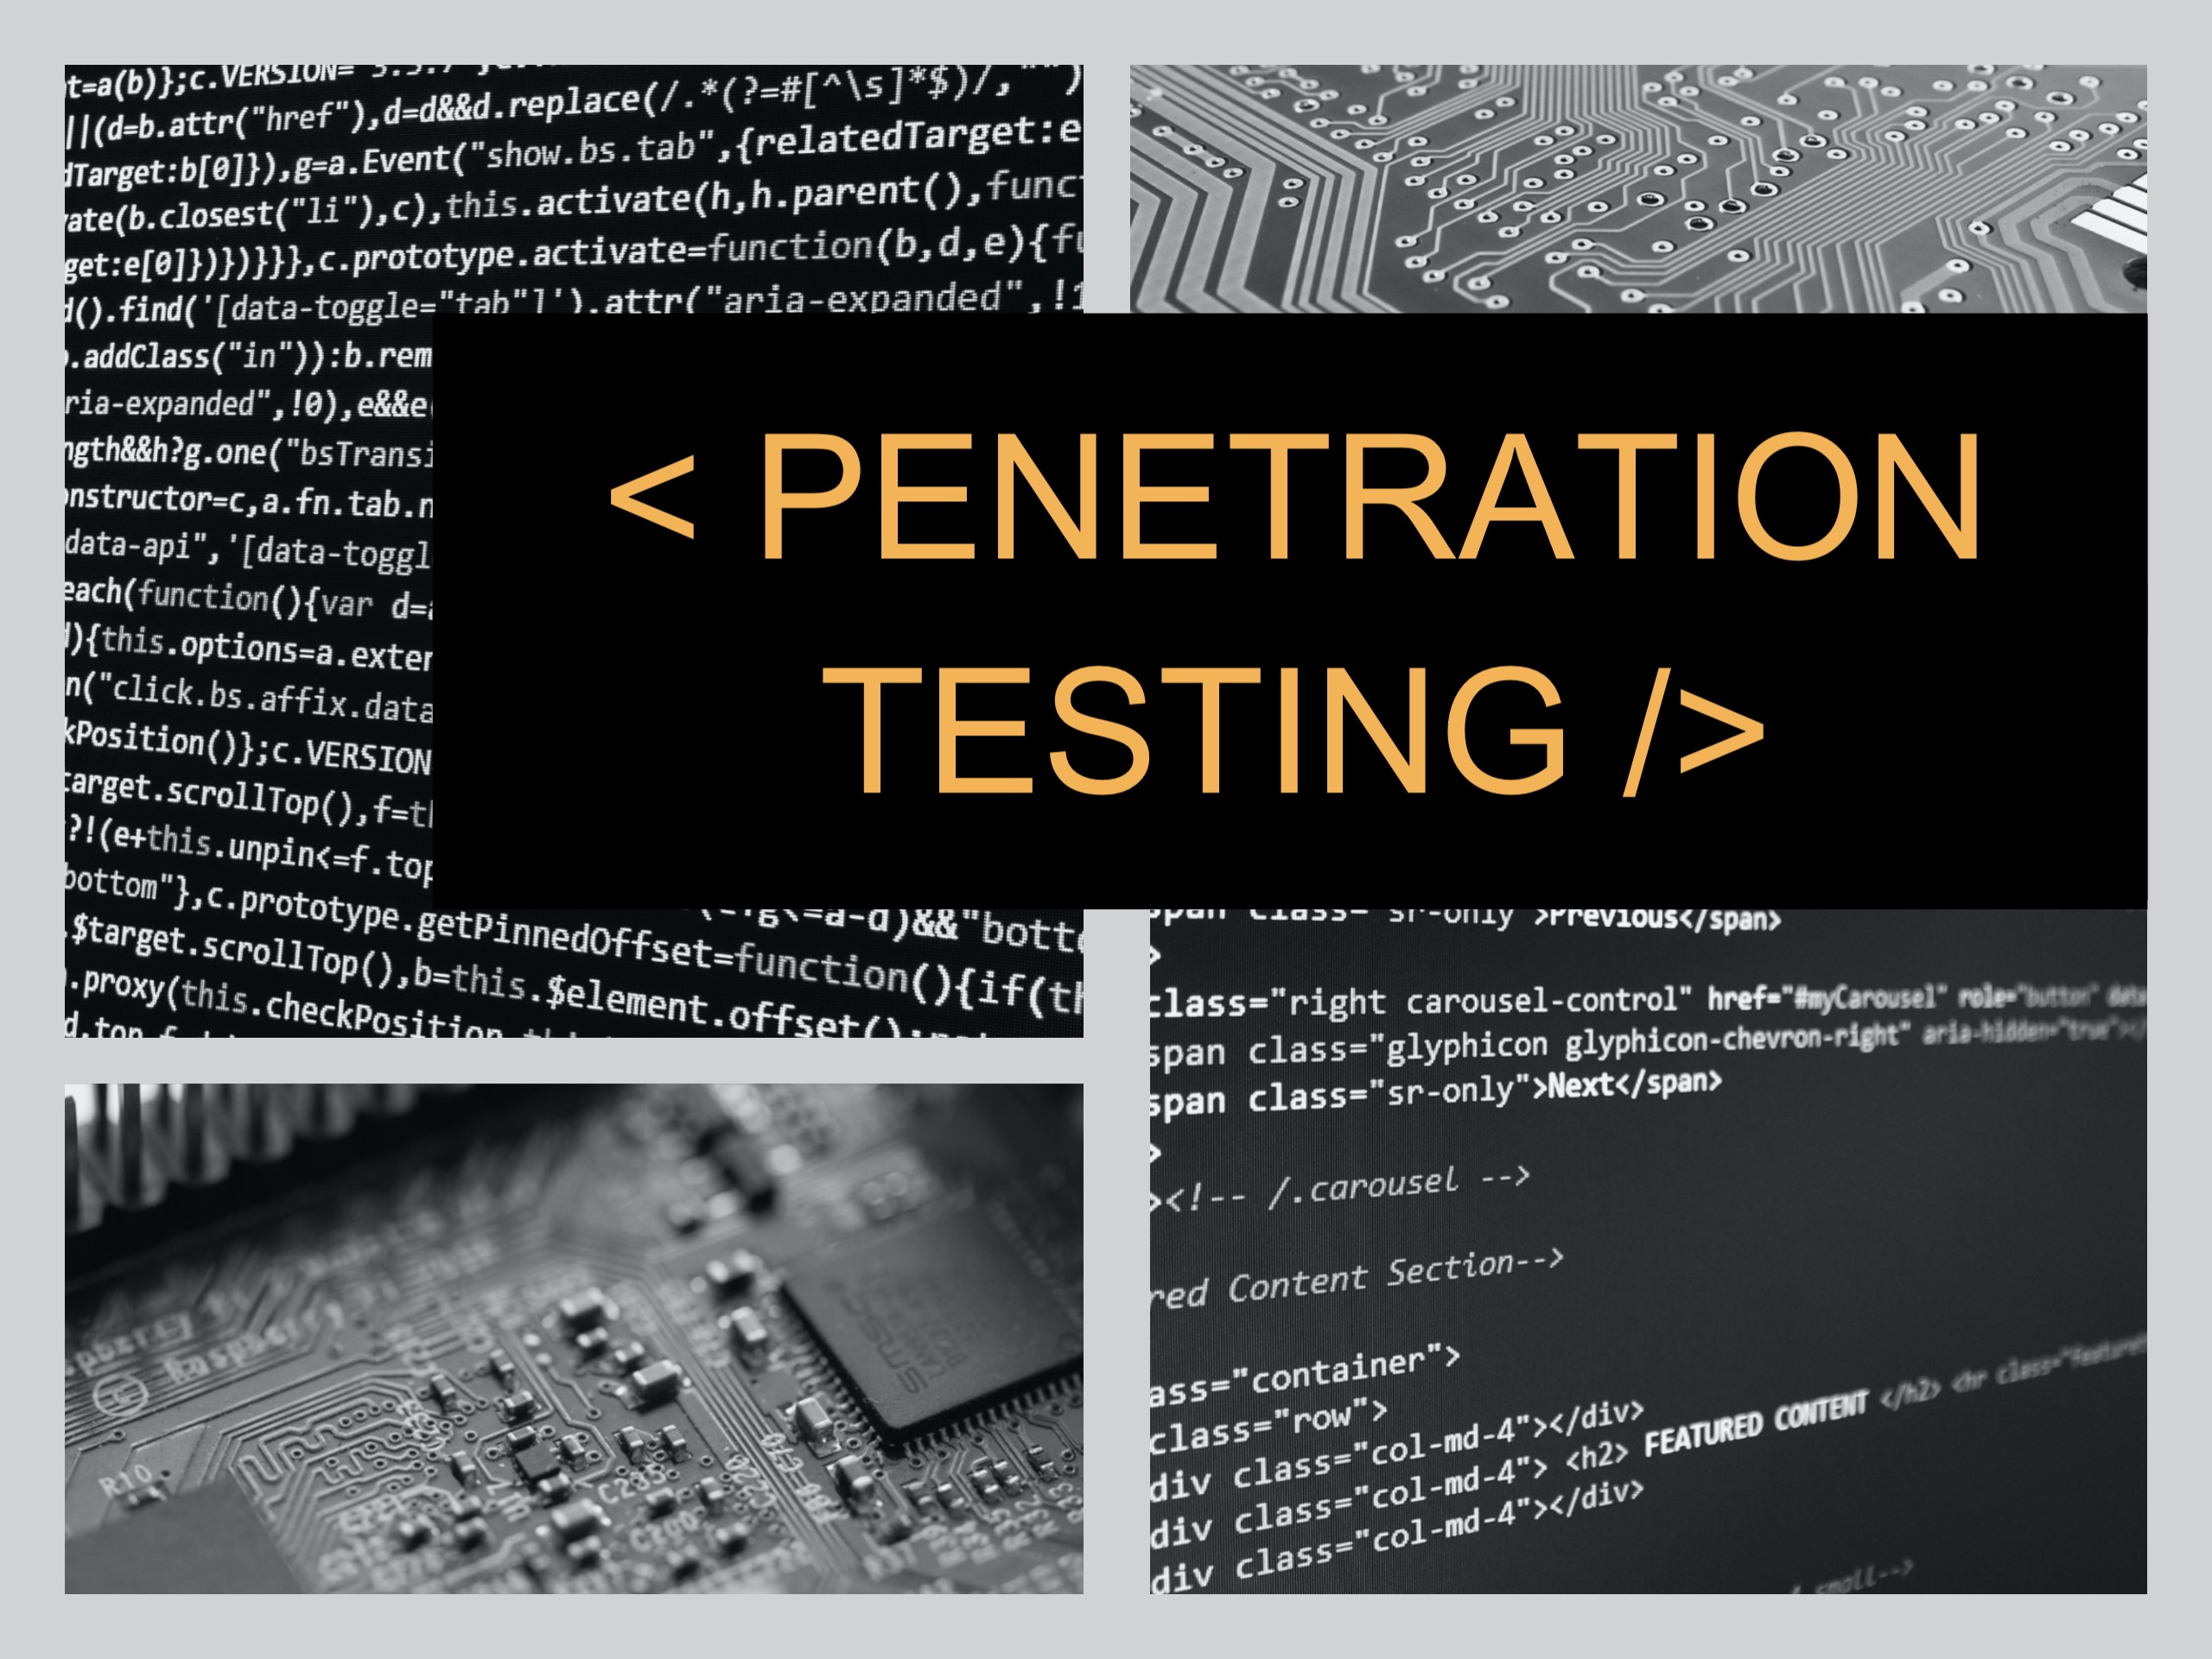 Penetration Testing by Security Engineers